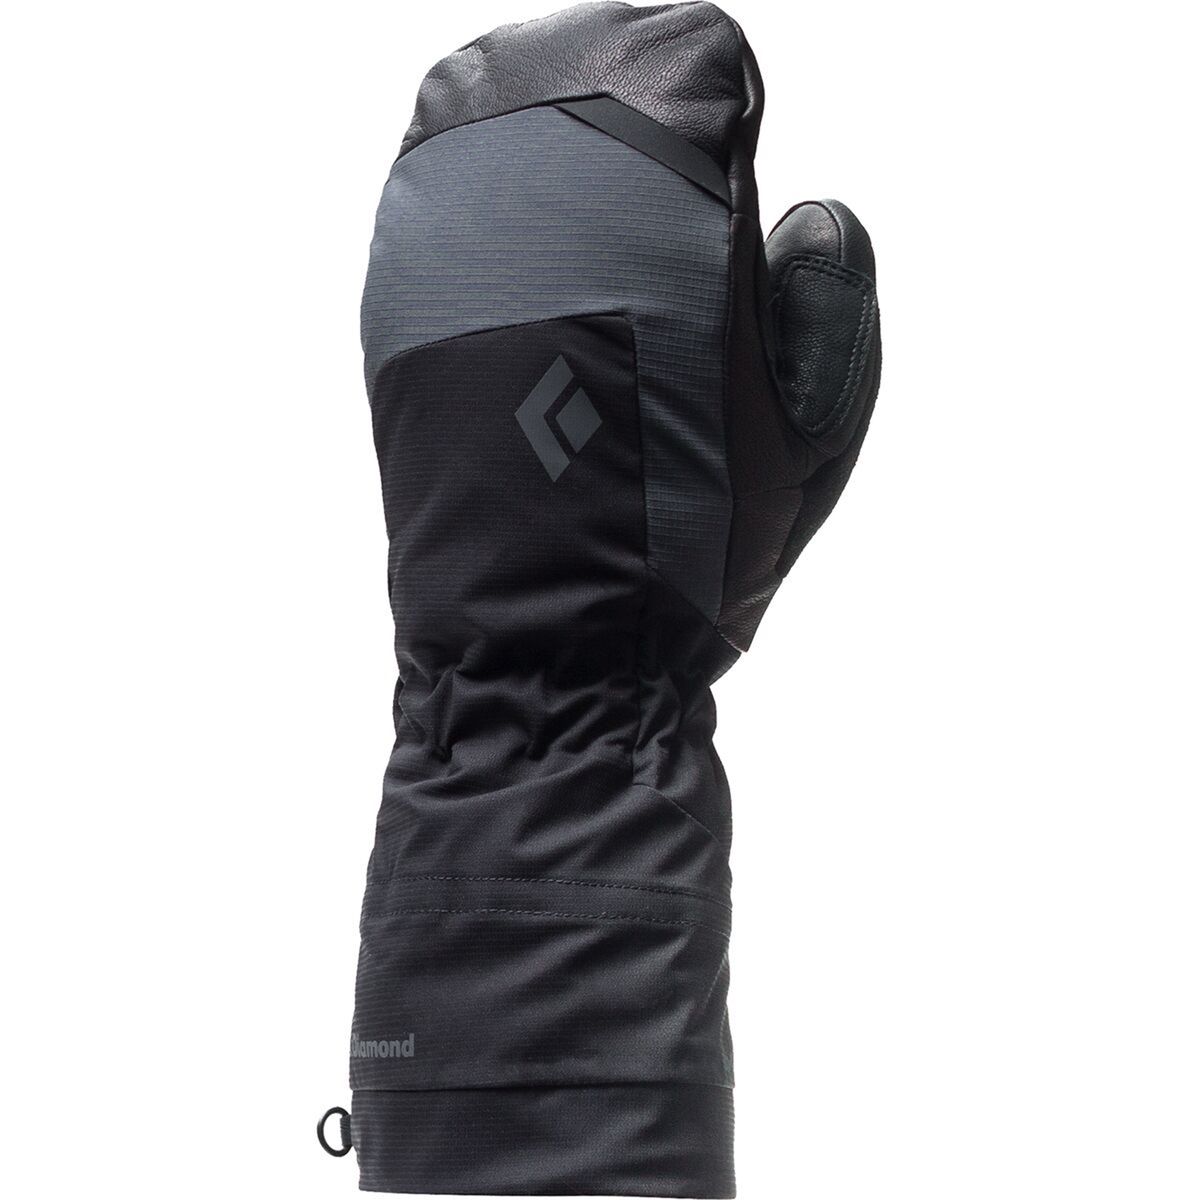 Best for Extreme Cold: Black Diamond Mercury Mittens